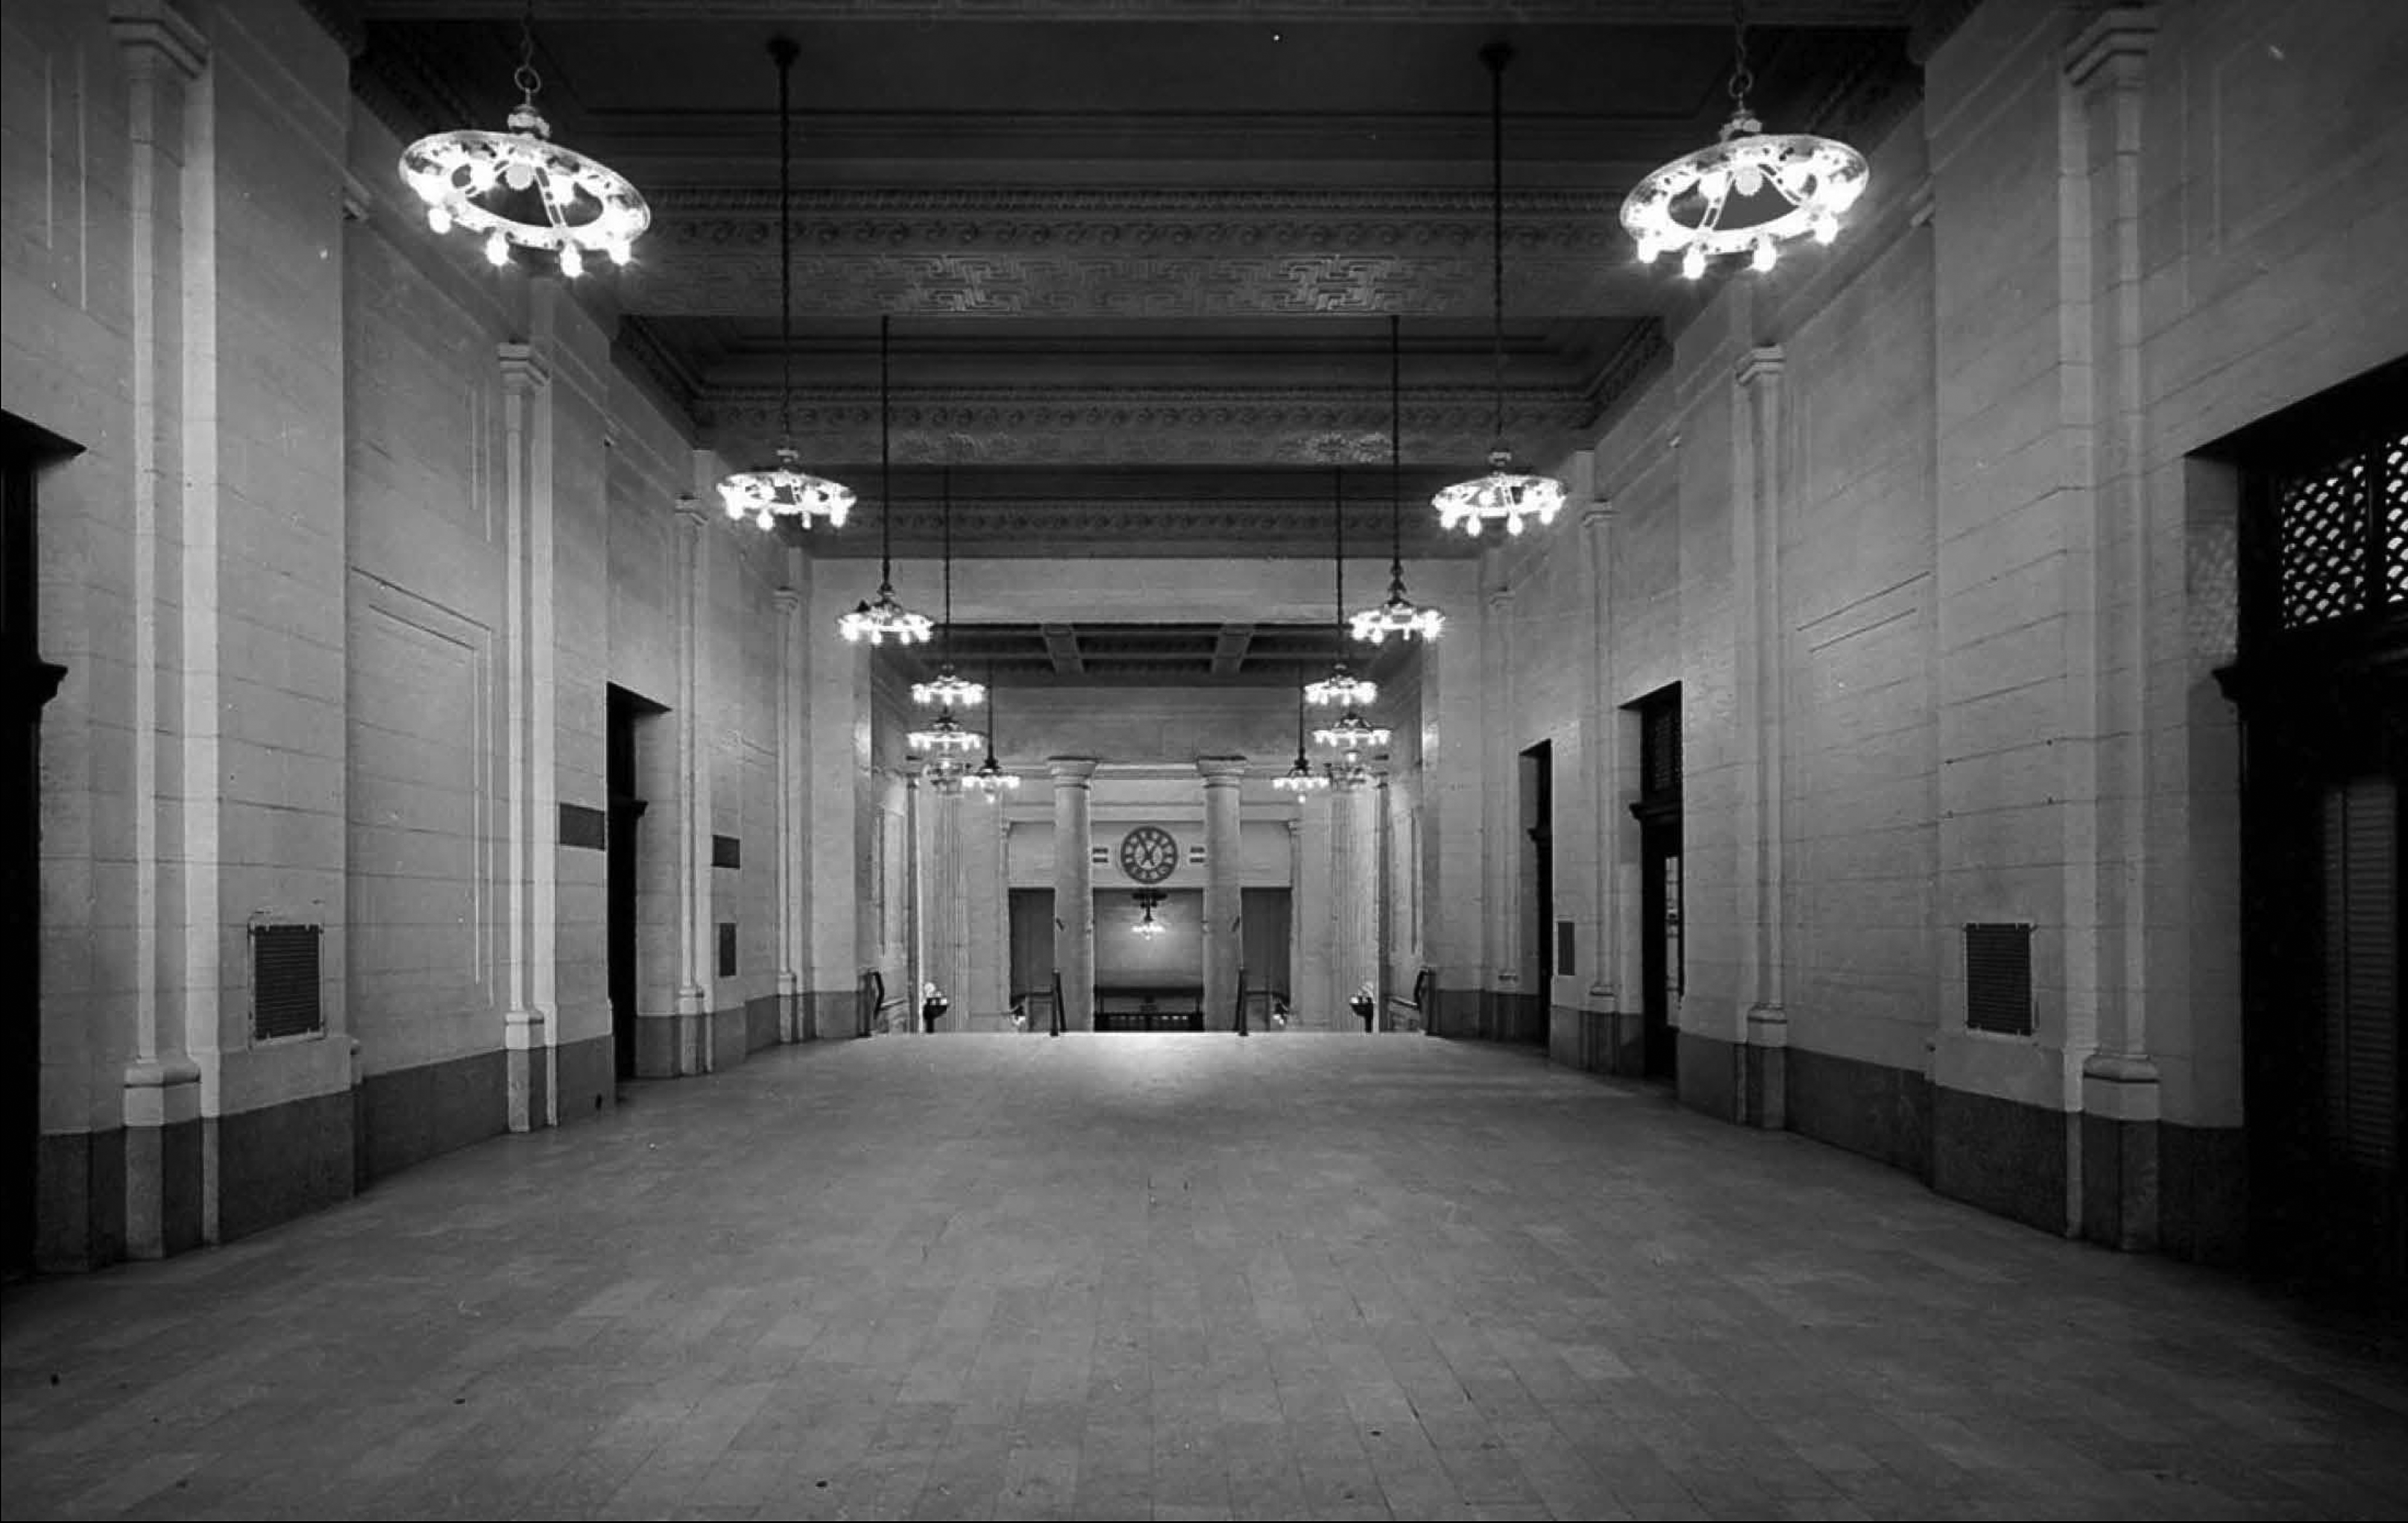 A long low-ceilinged corridor funnelled passengers from Union Station’s entrance on Rideau Street to a flight of stairs that led down into the general waiting room.